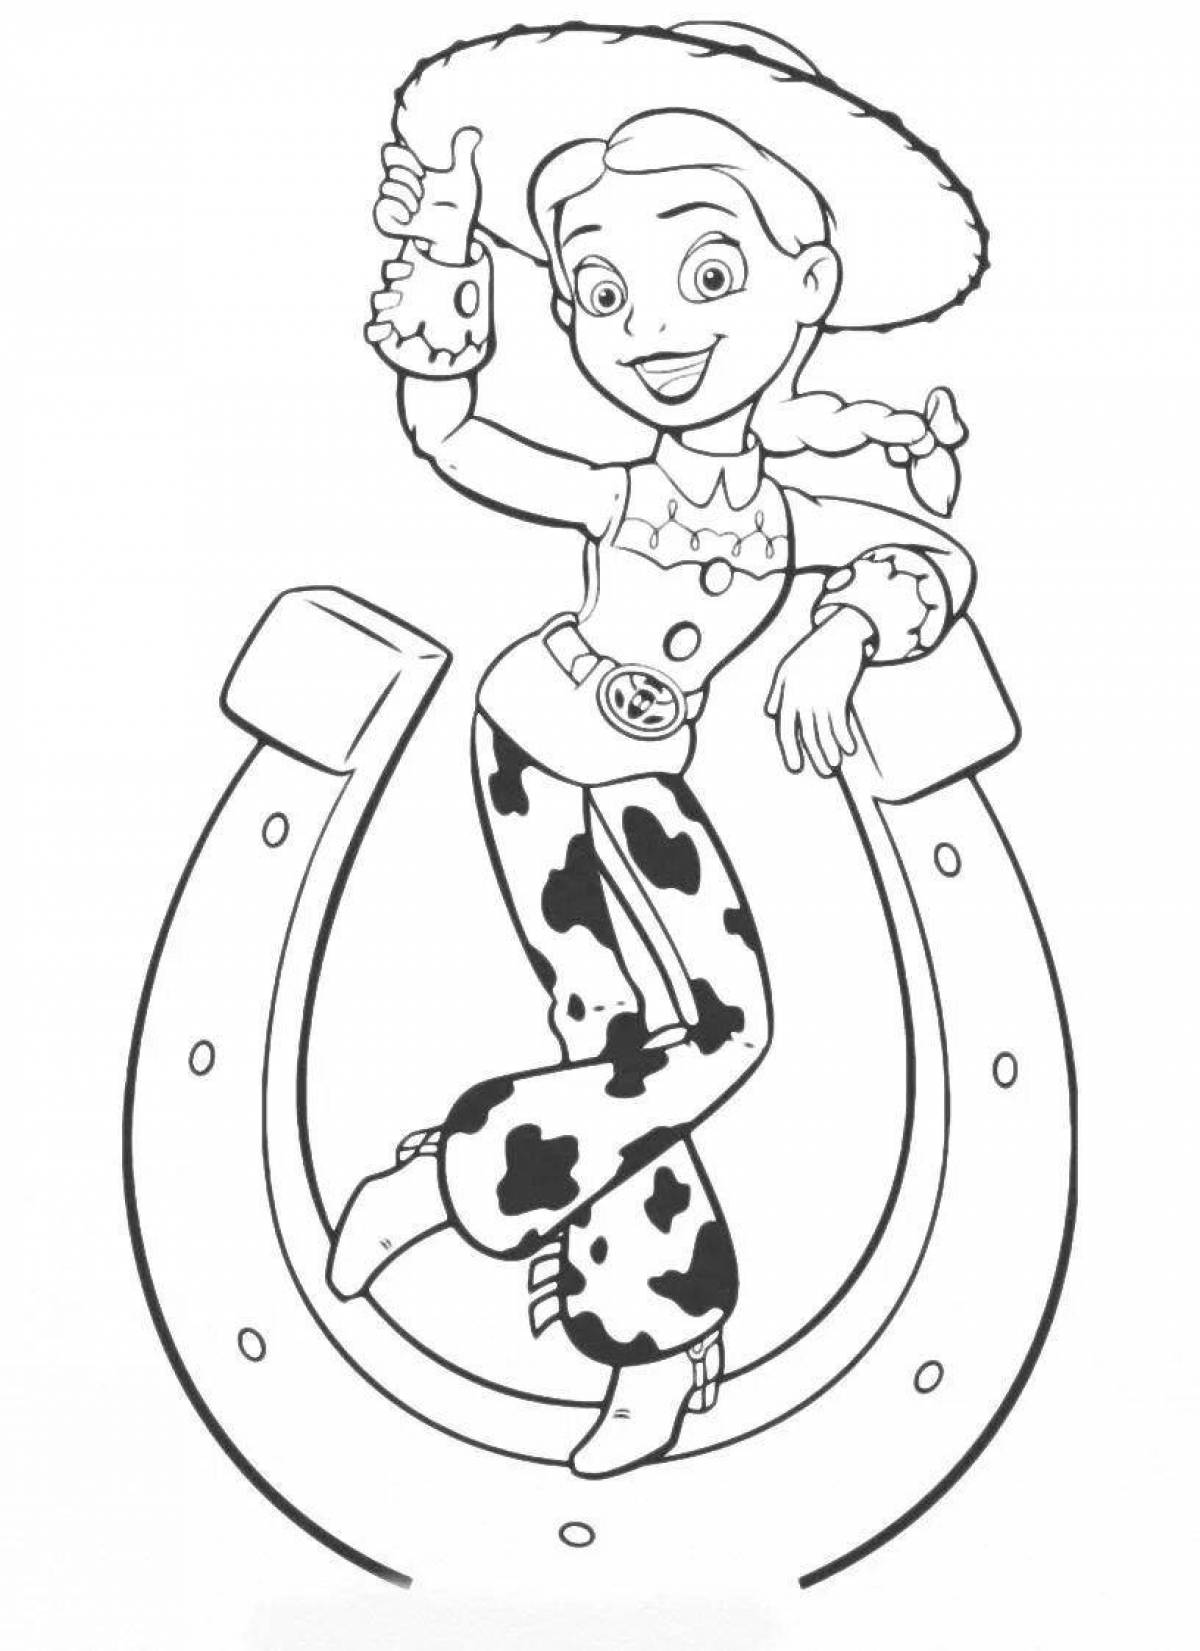 Adorable jessie toy story coloring book